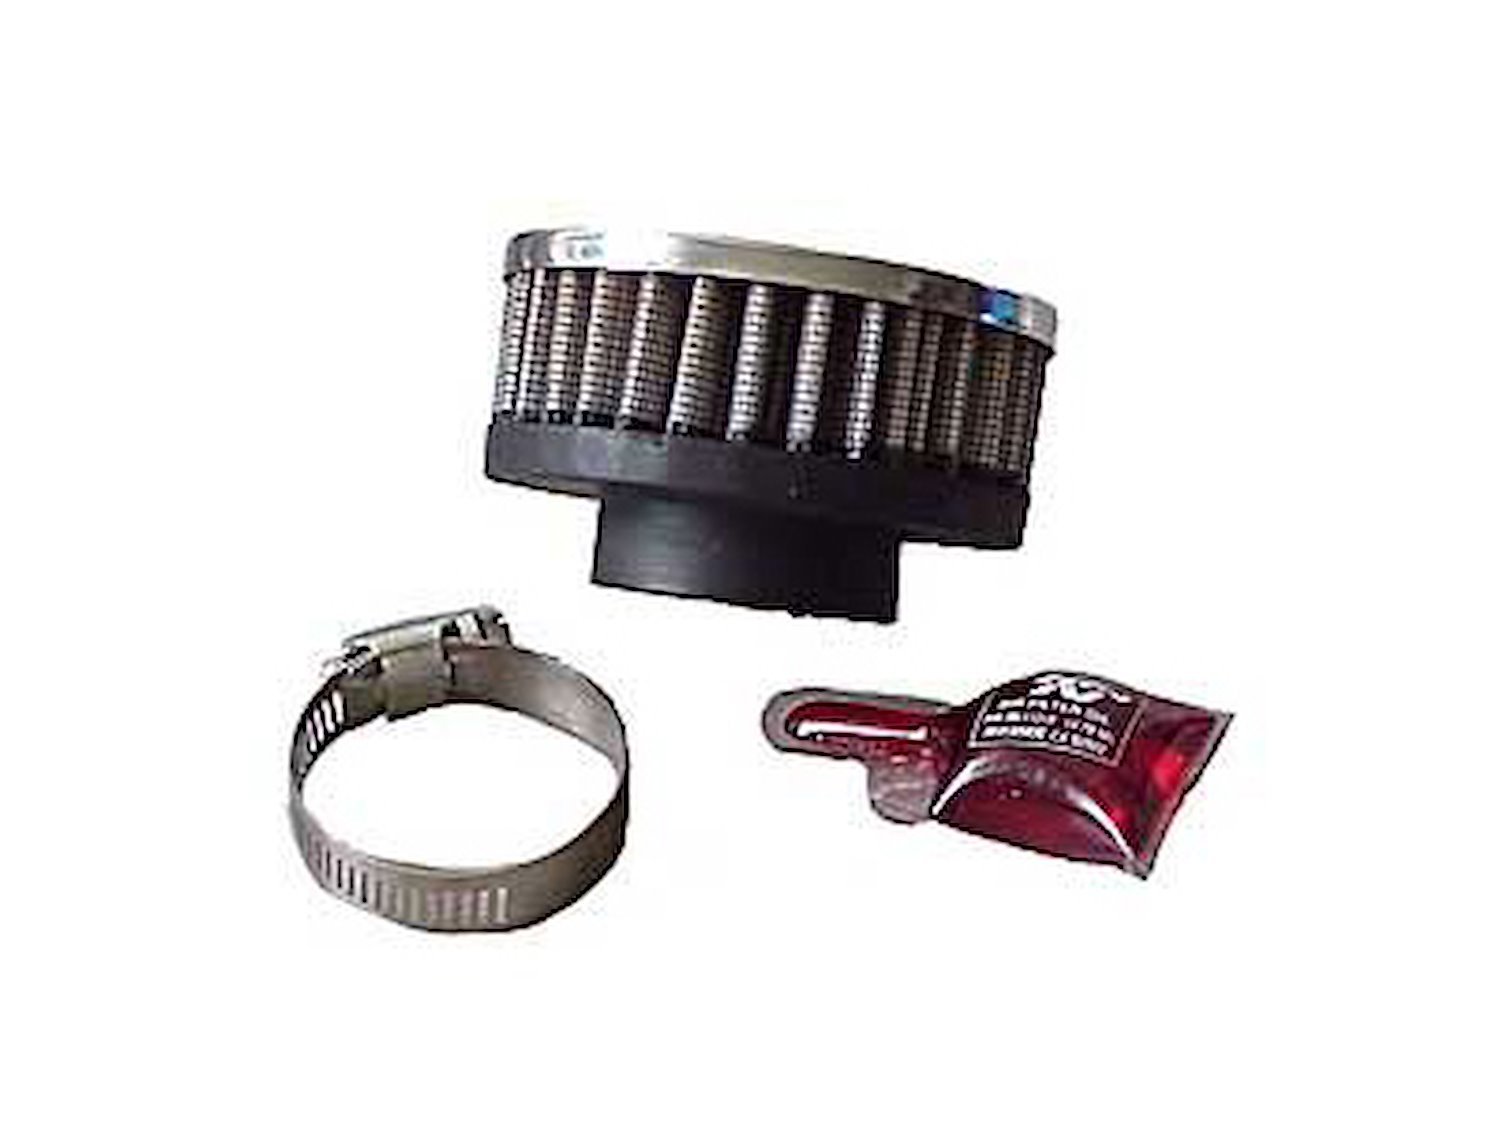 Round Straight Air Filter Flange Dia. (F): 1.563" (40 mm)